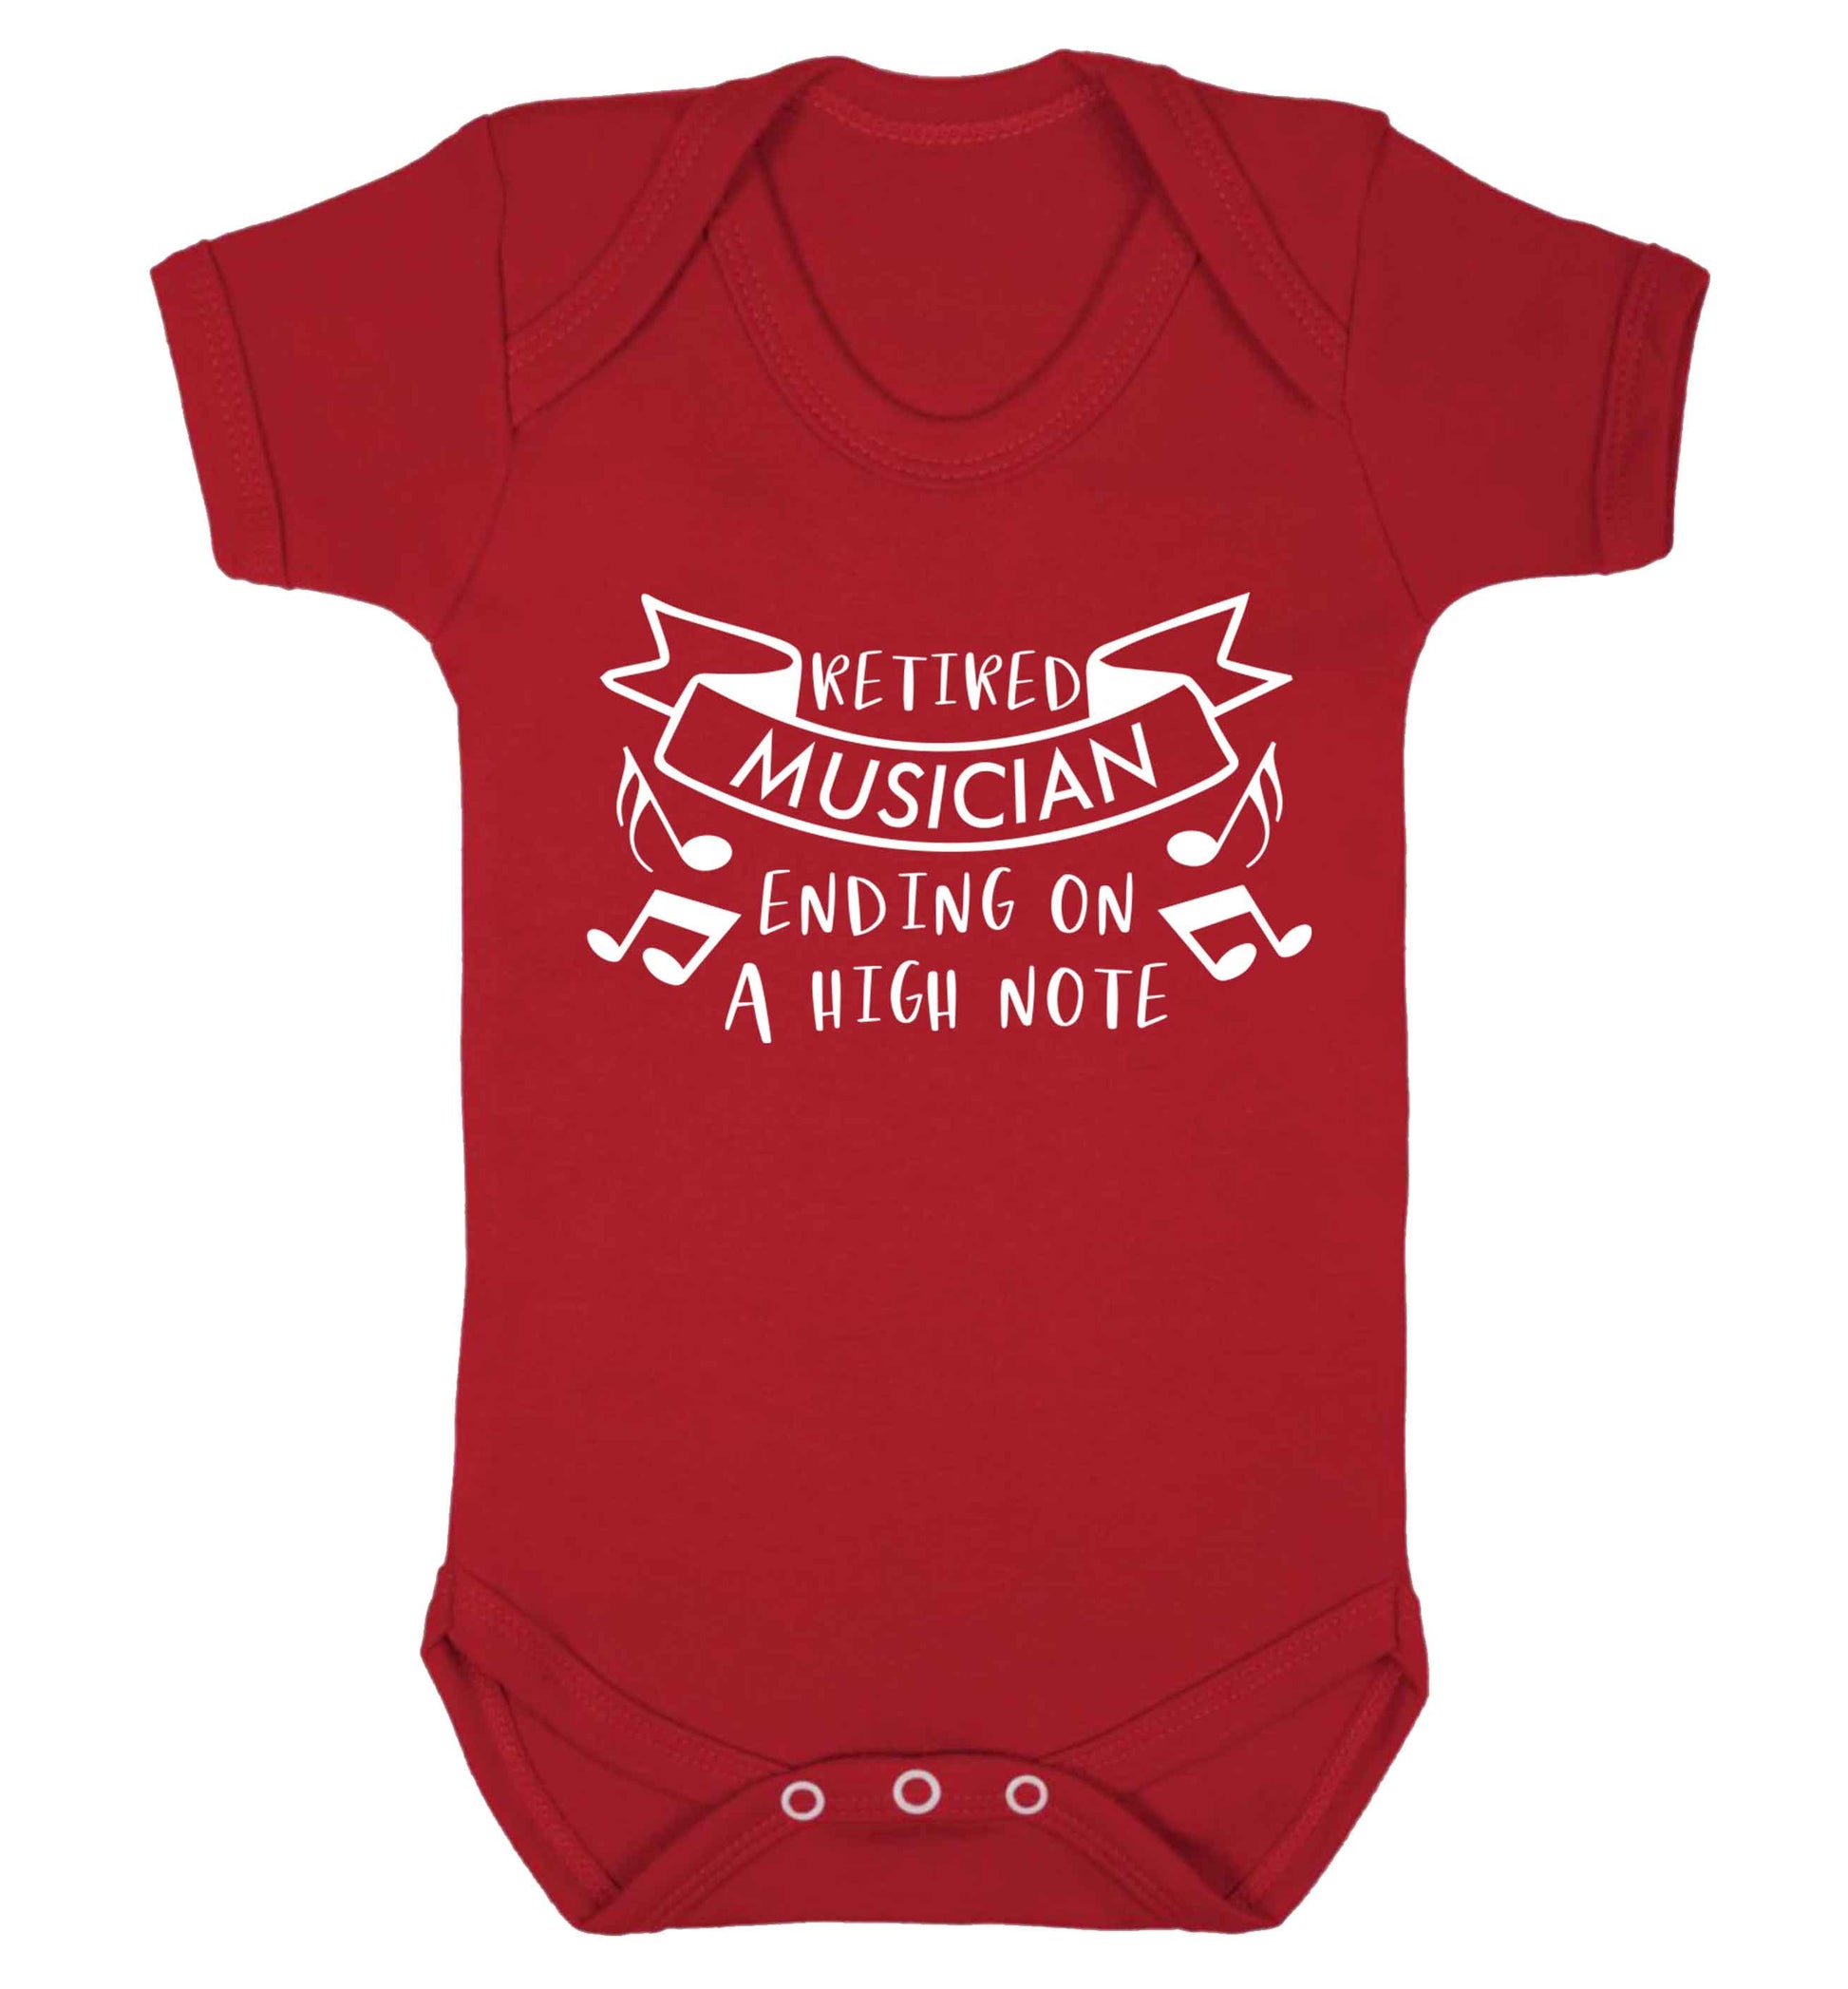 Retired musician ending on a high note Baby Vest red 18-24 months